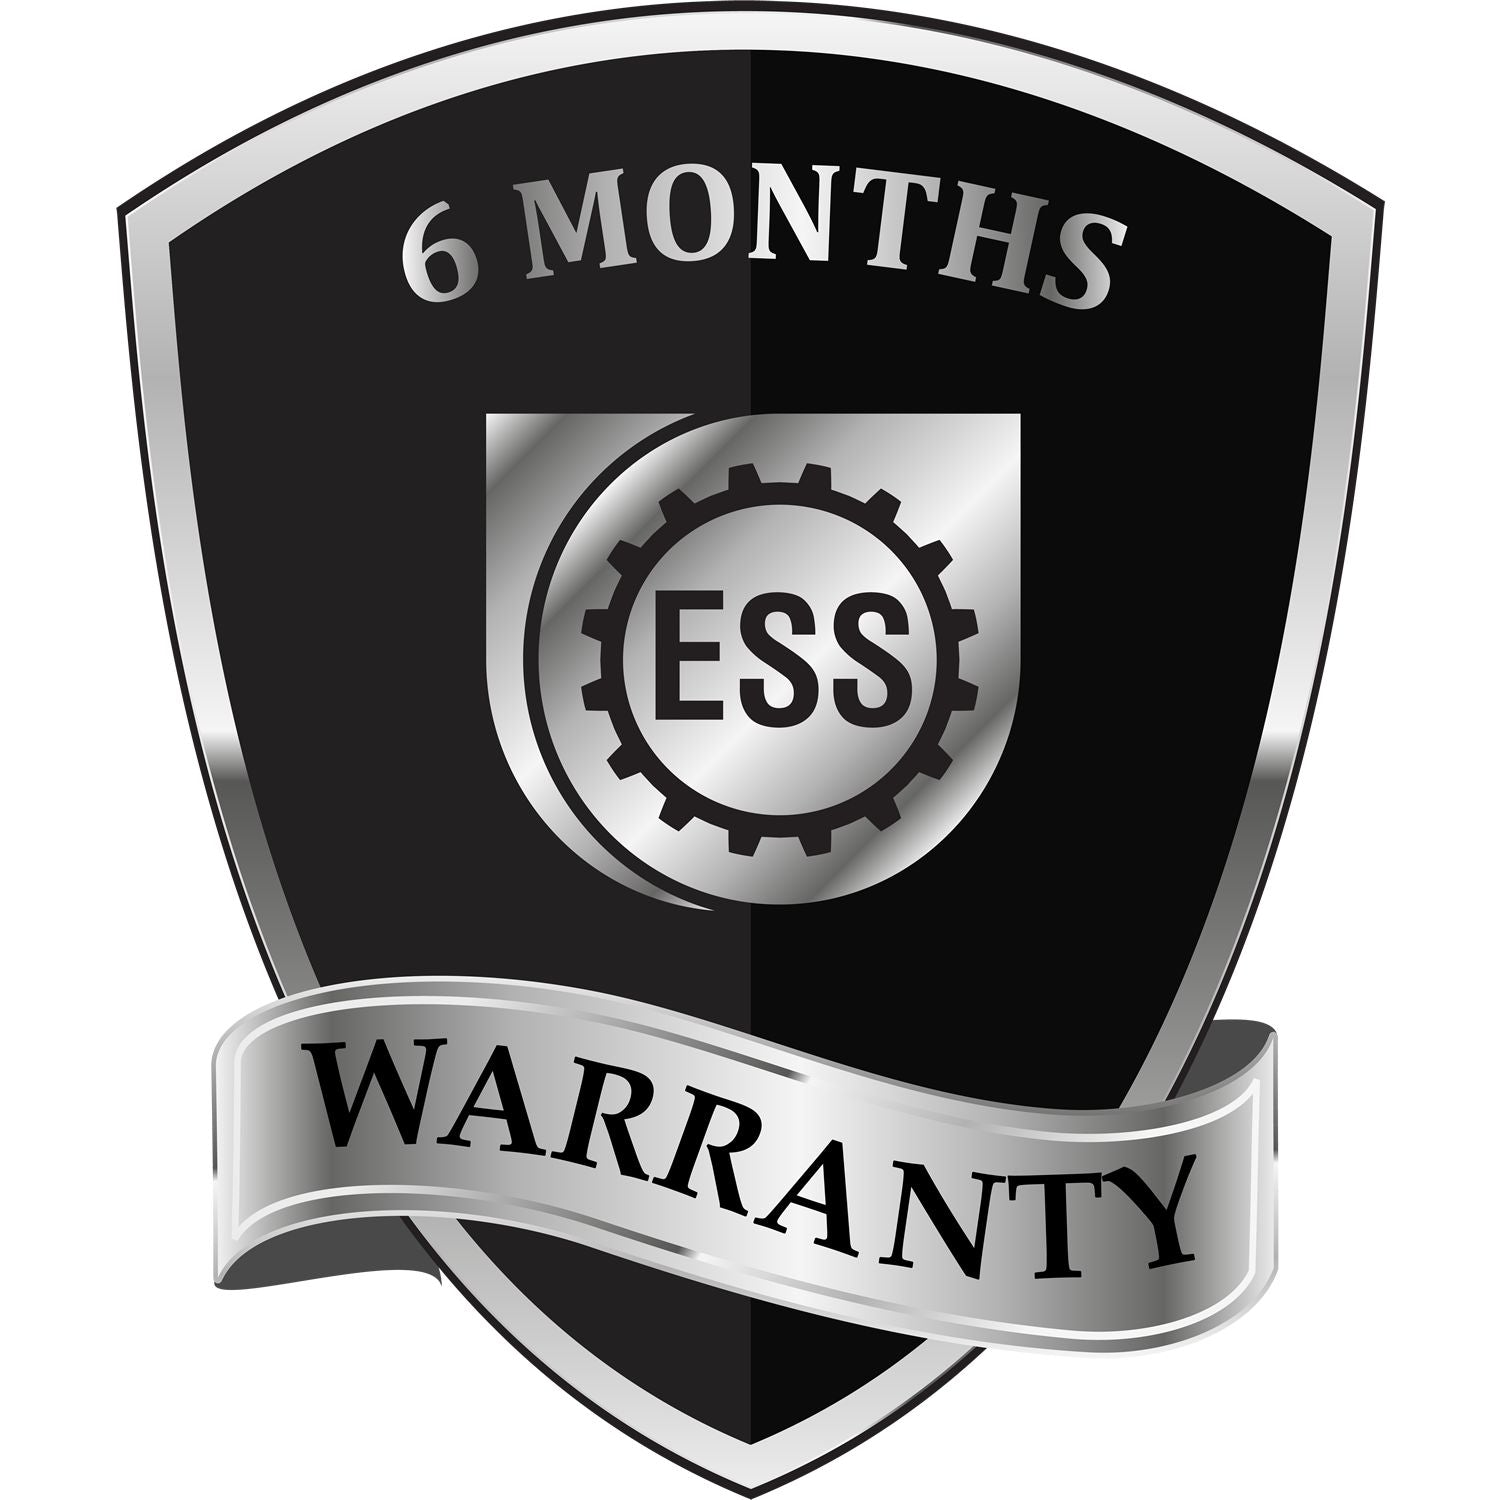 A badge or emblem showing a warranty icon for the Michigan Professional Engineer Seal Stamp